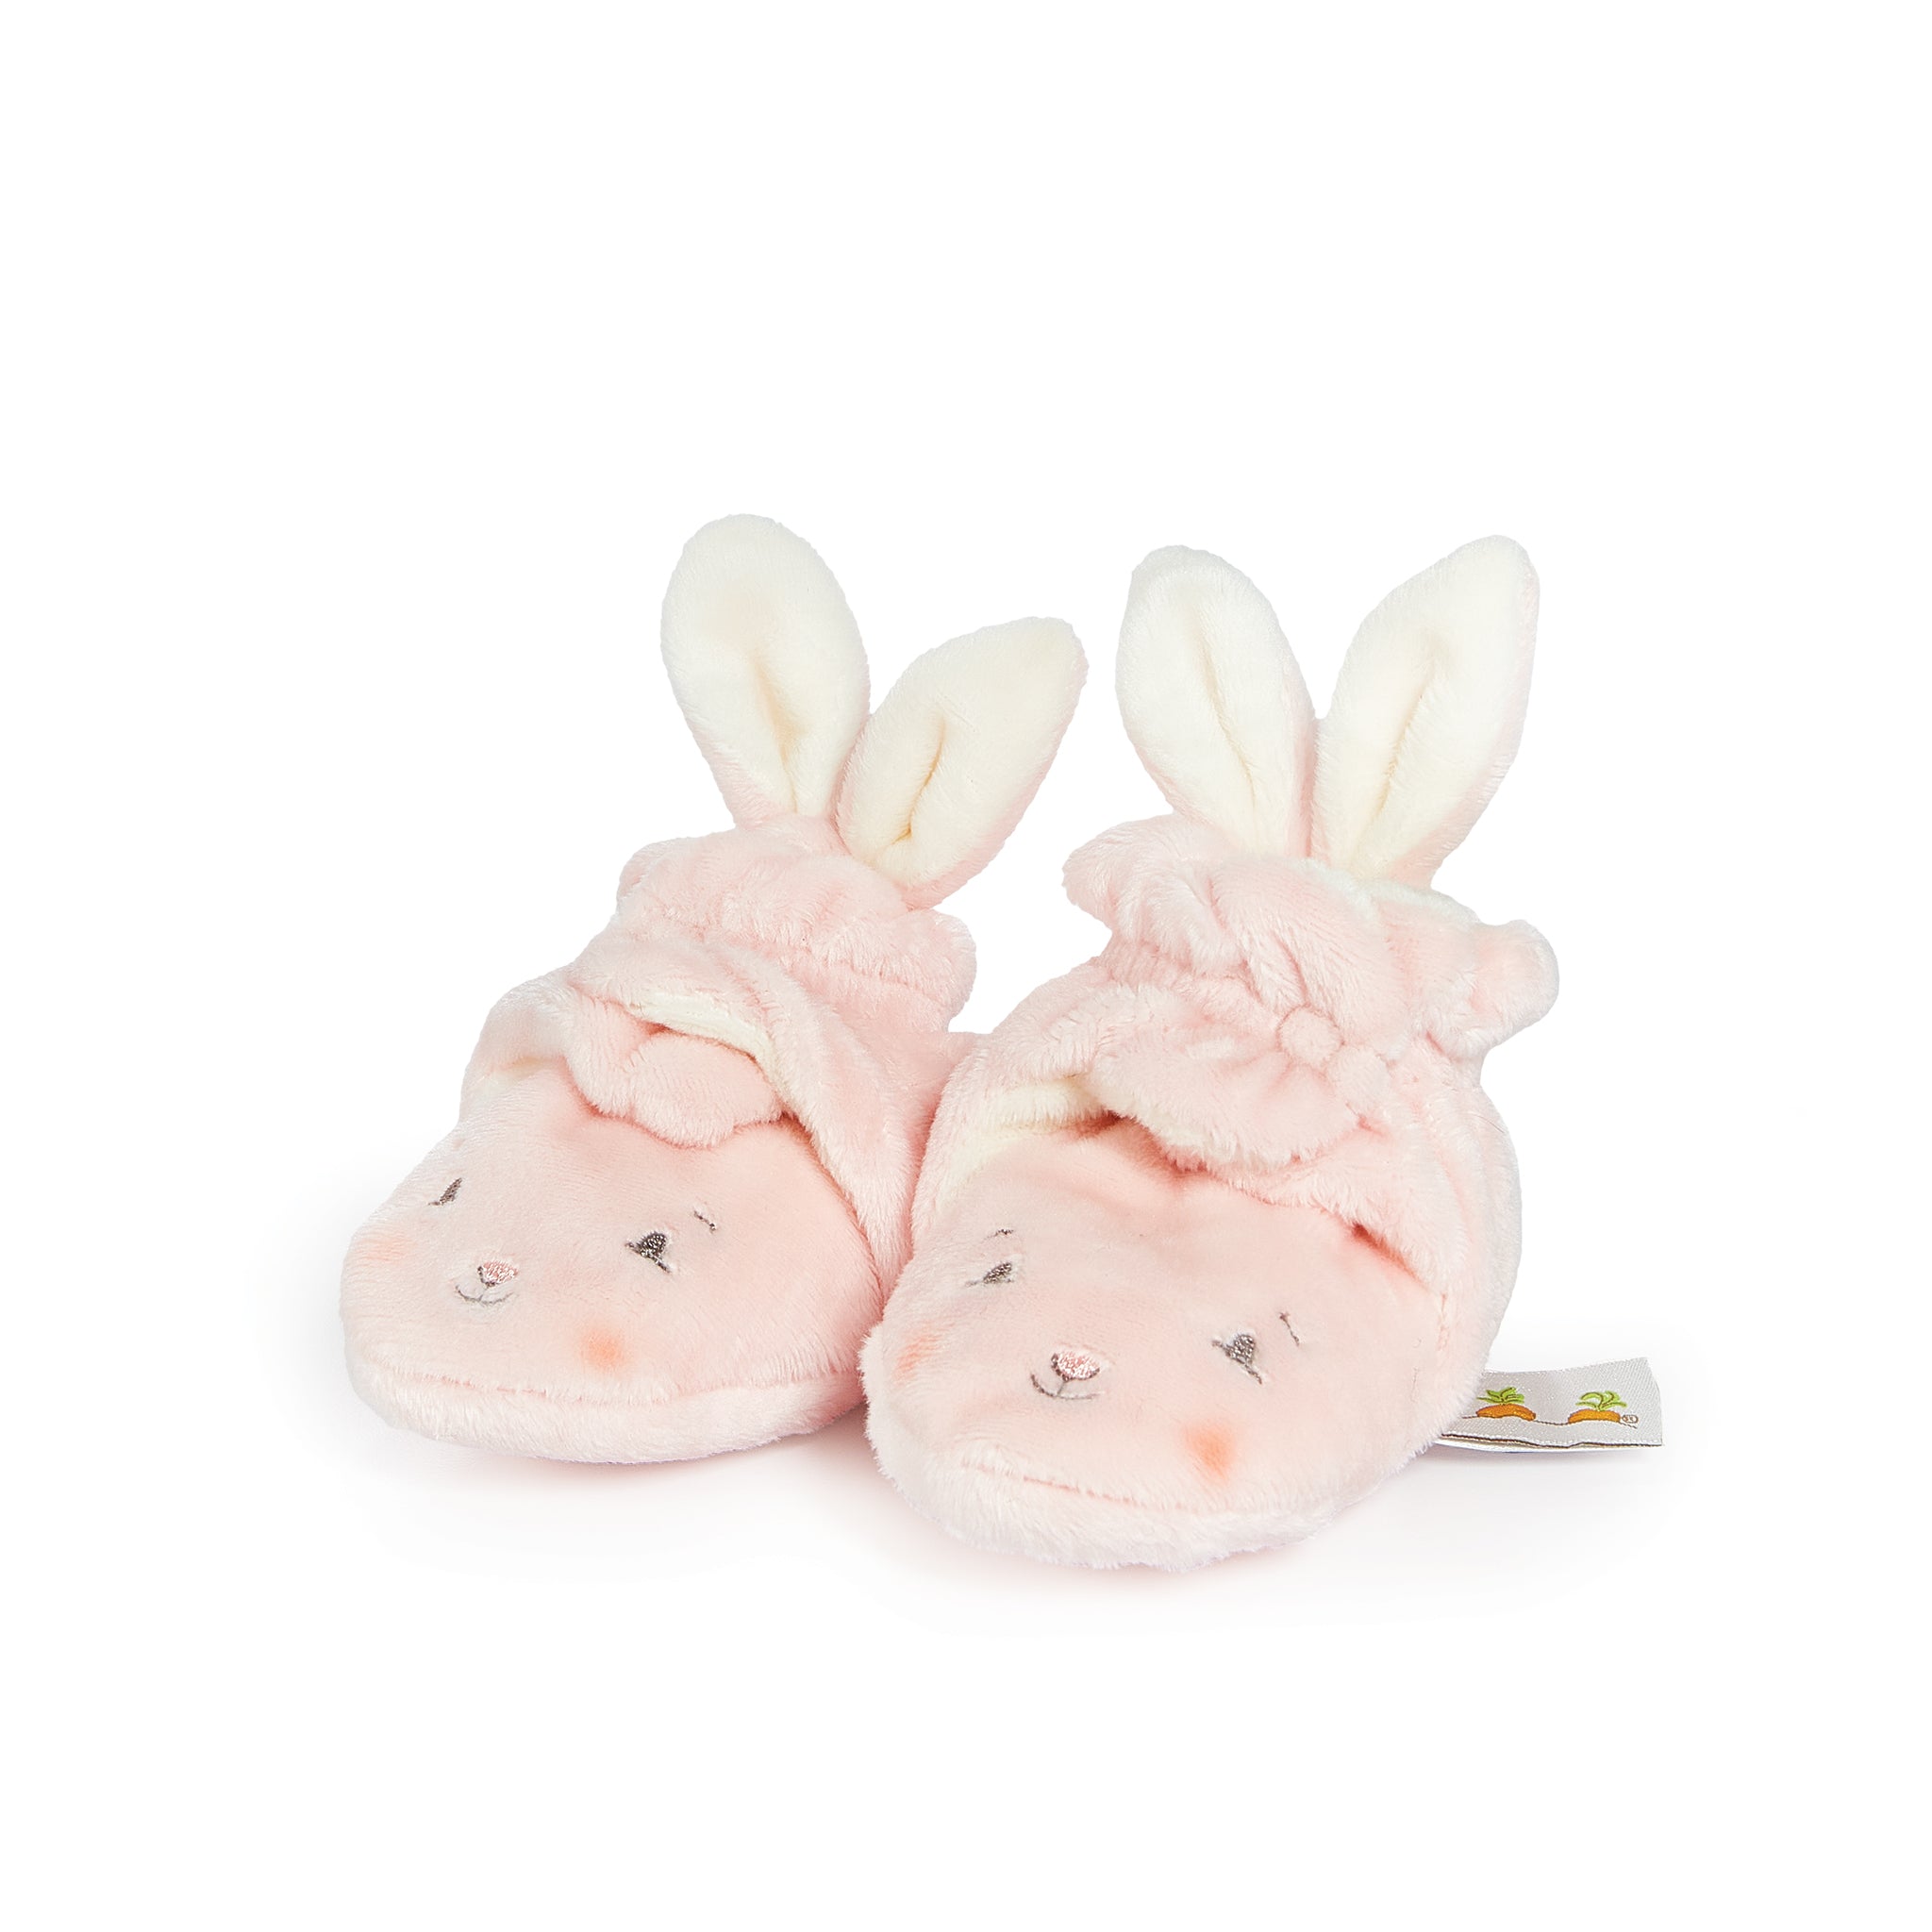 Blossom Bunny Hoppy Feet Slippers | Pink Baby Slippers | Baby Clothes ...